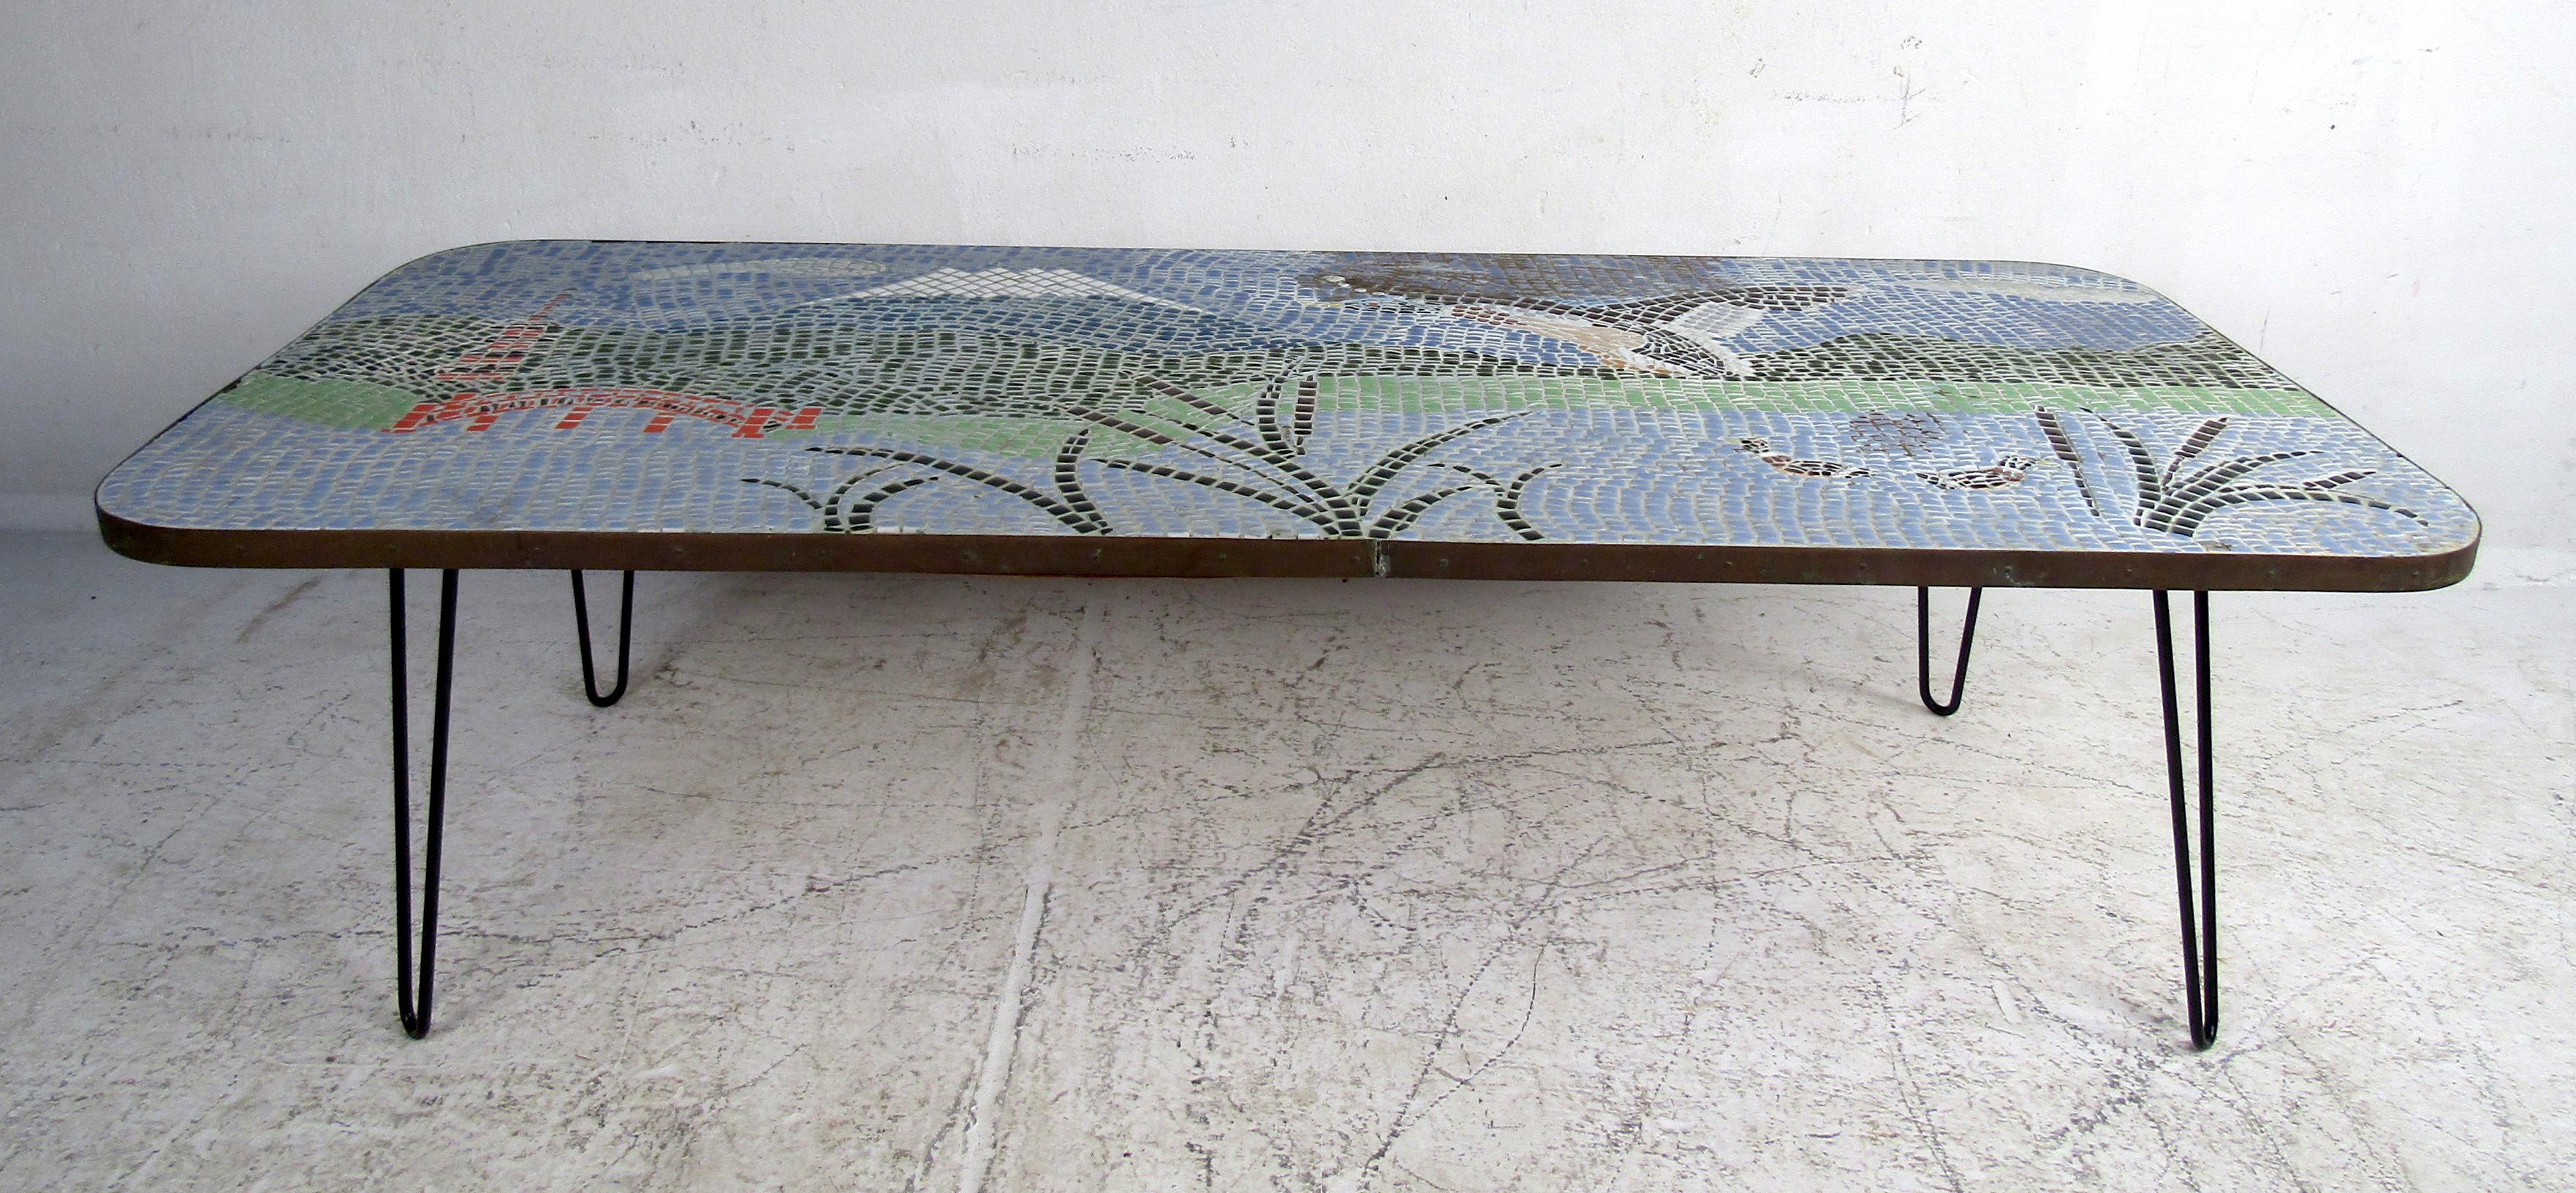 Vintage Modern Mosaic Coffee Table In Good Condition For Sale In Brooklyn, NY